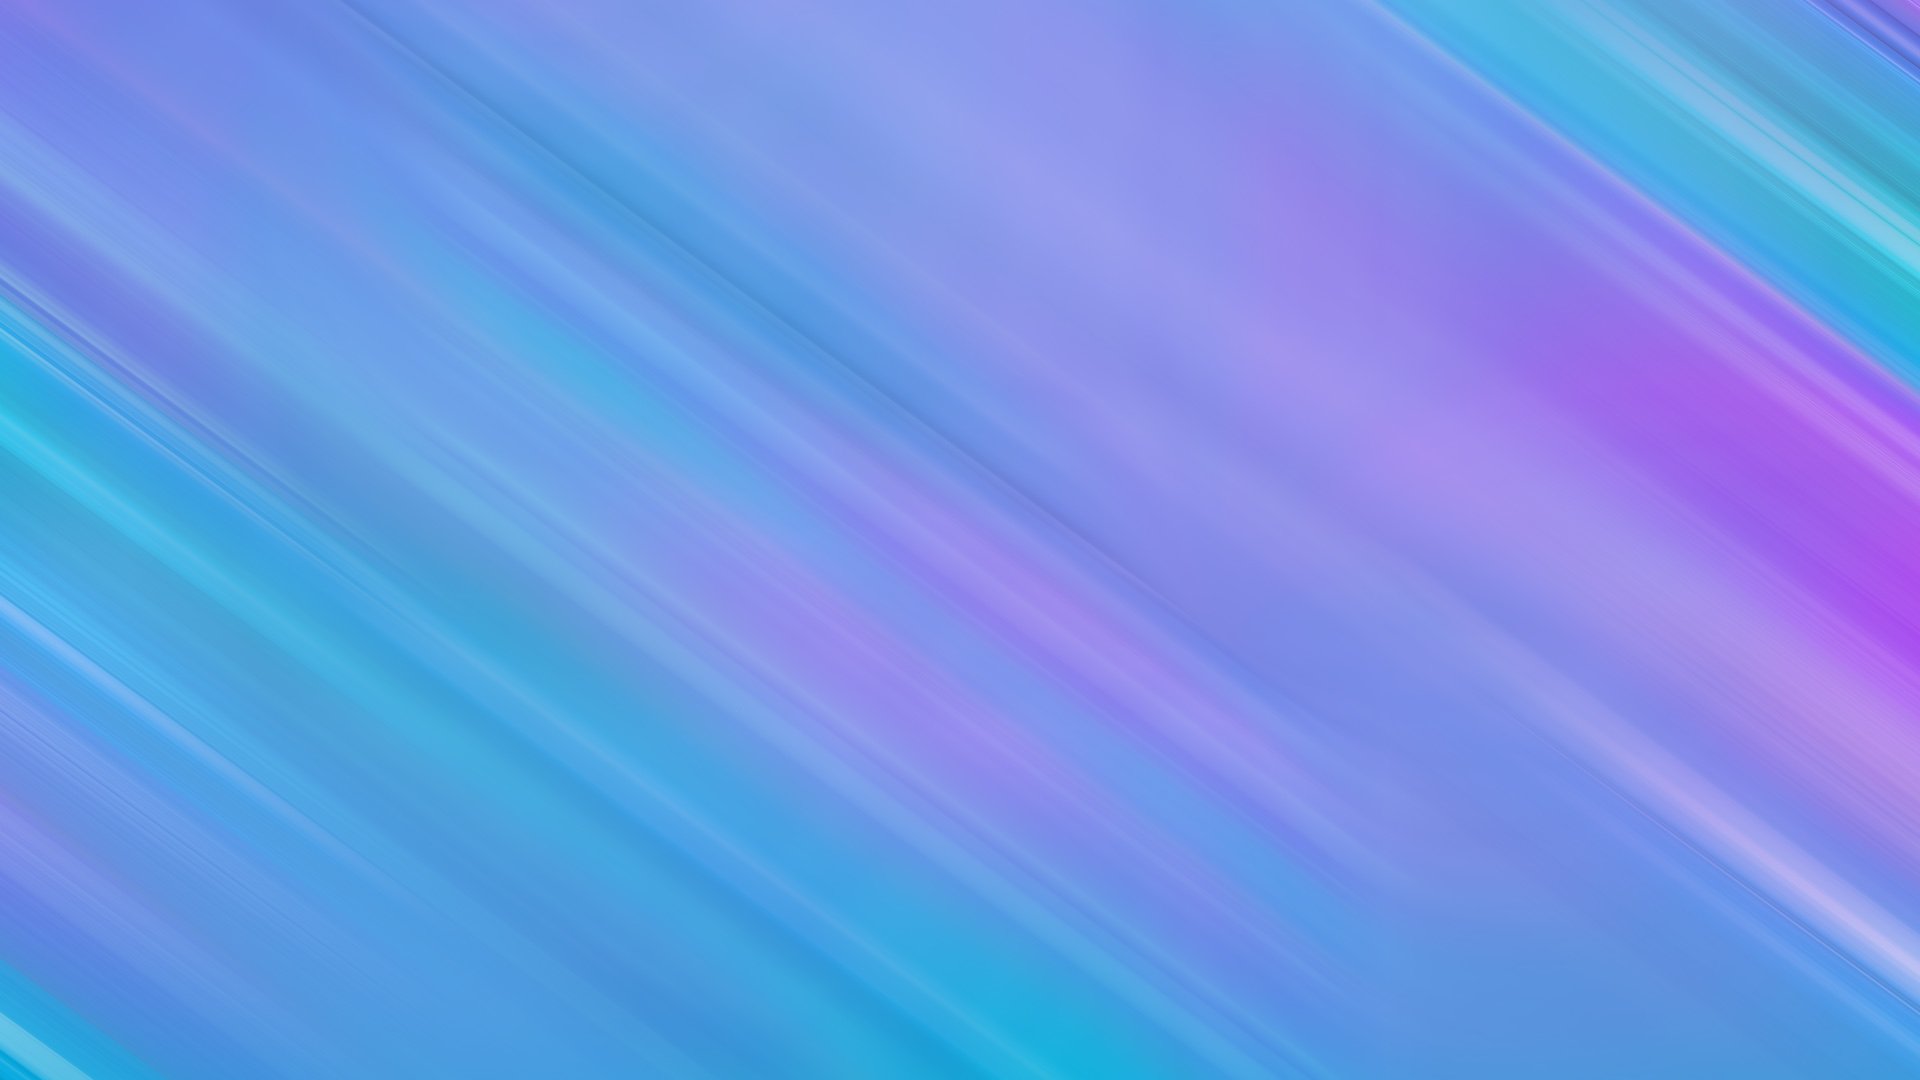 Gradient background #16 by Mimosa